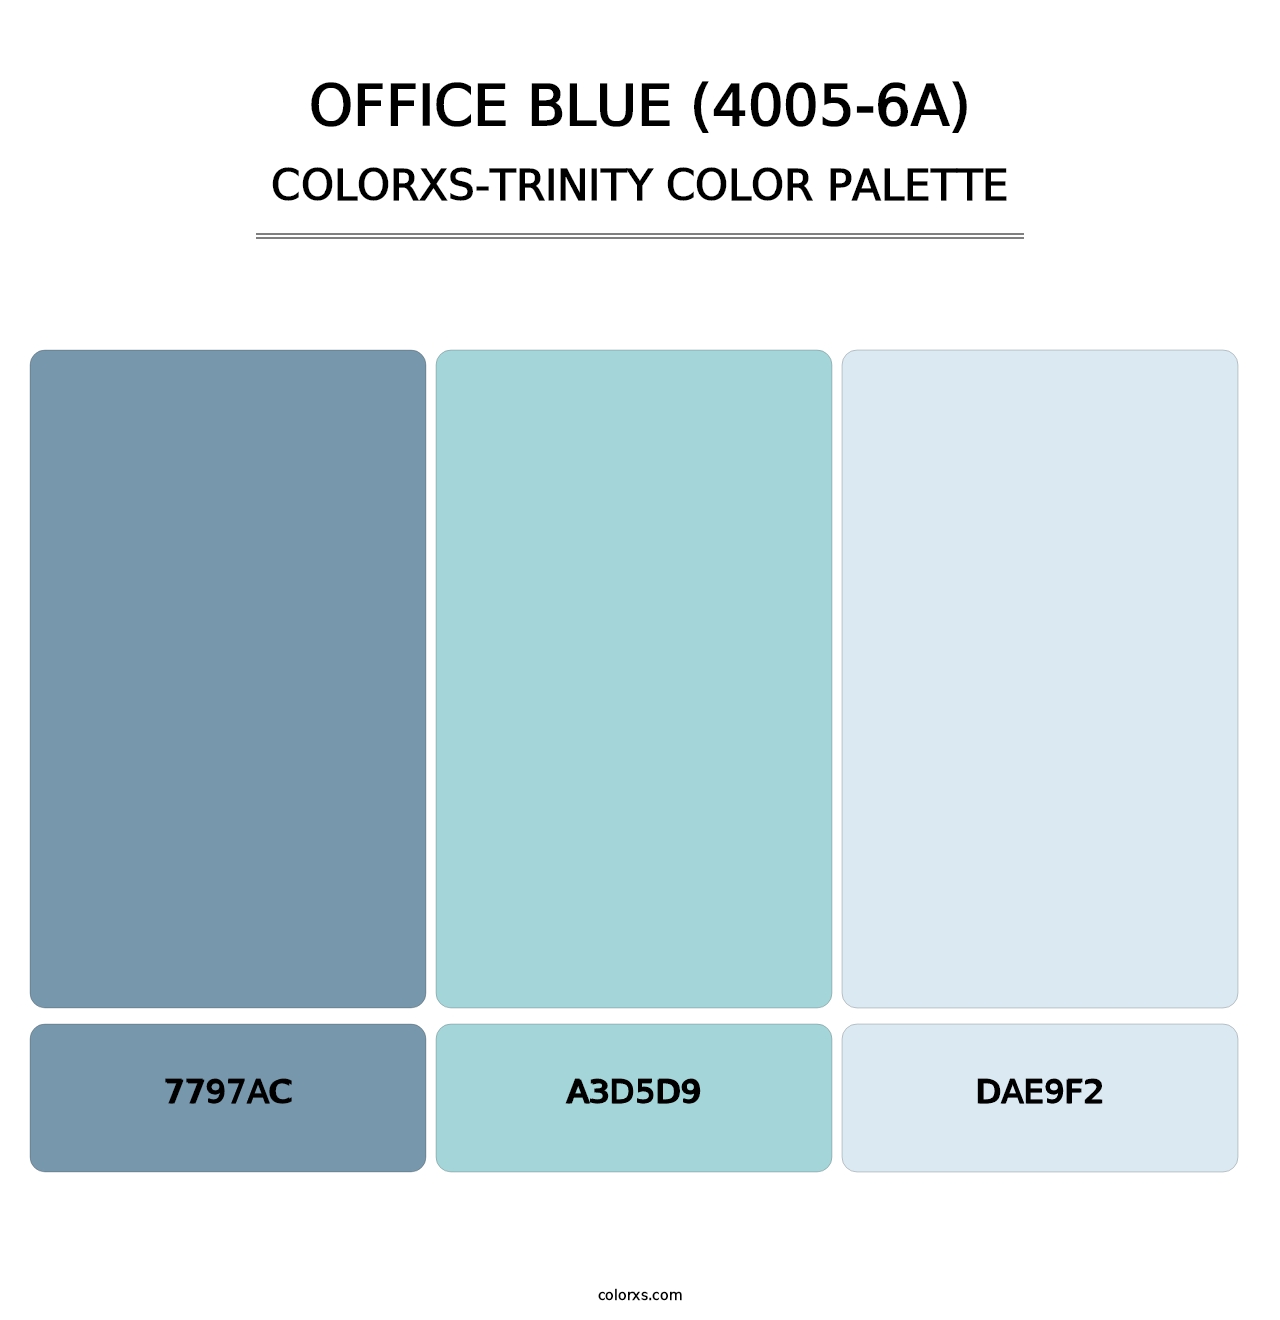 Office Blue (4005-6A) - Colorxs Trinity Palette